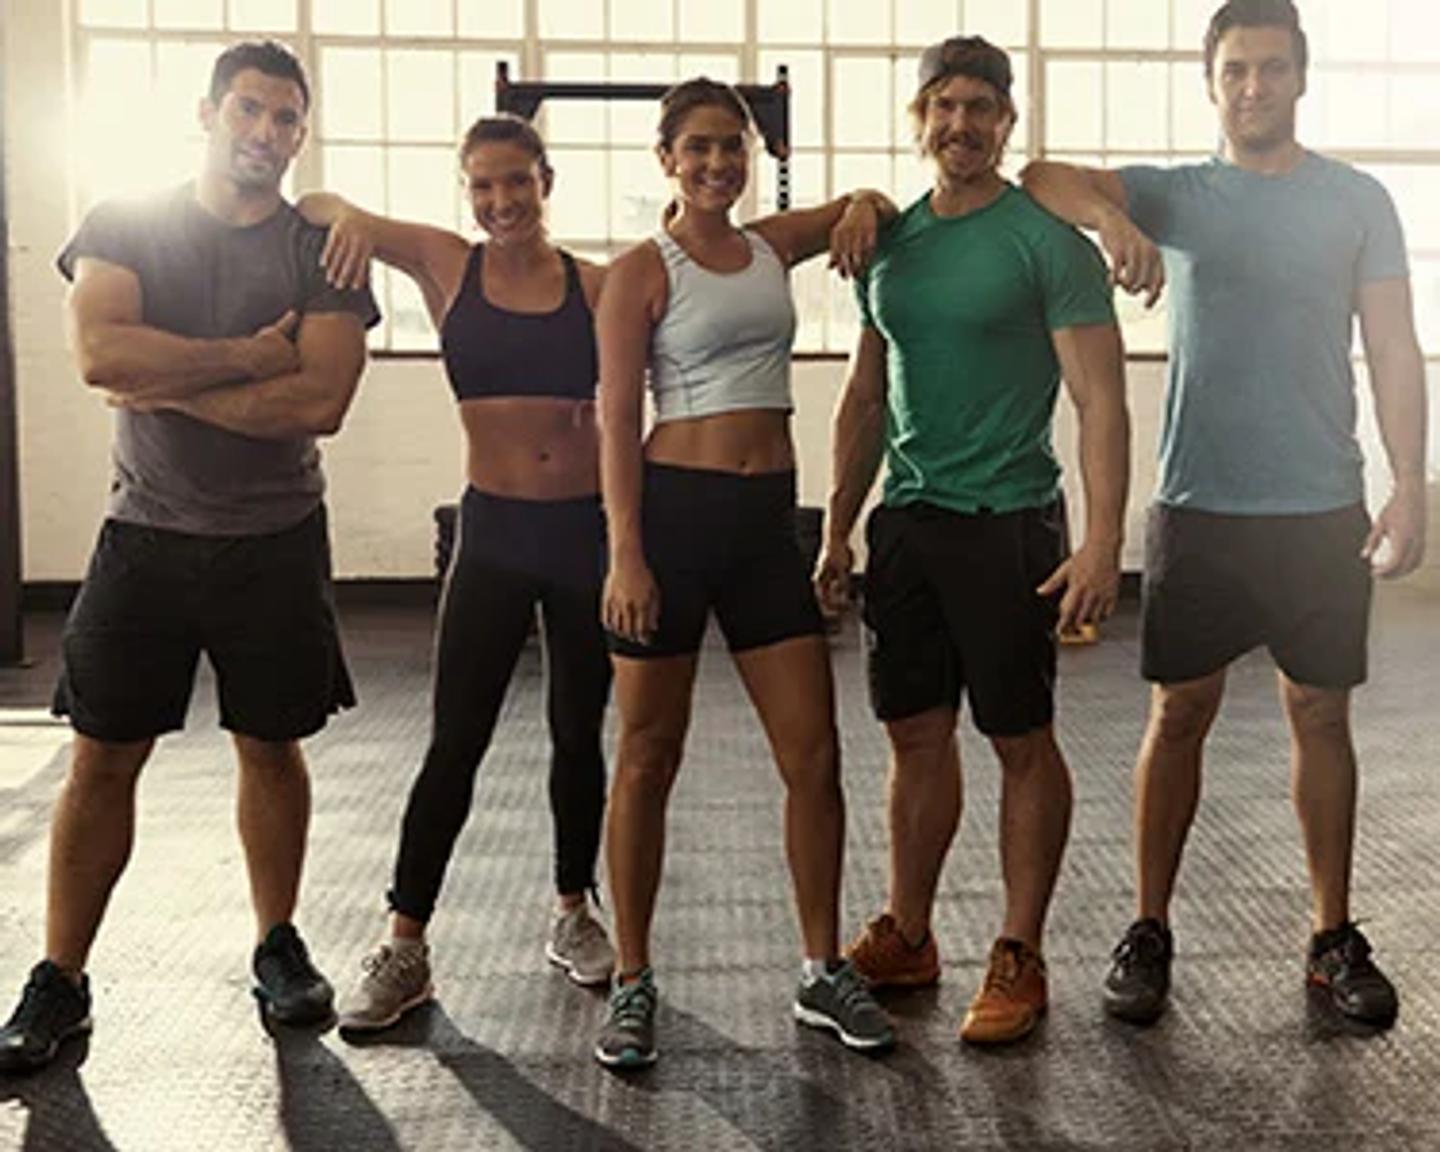 Group of ISSA Certified Personal Trainers posing for a photo in a gym